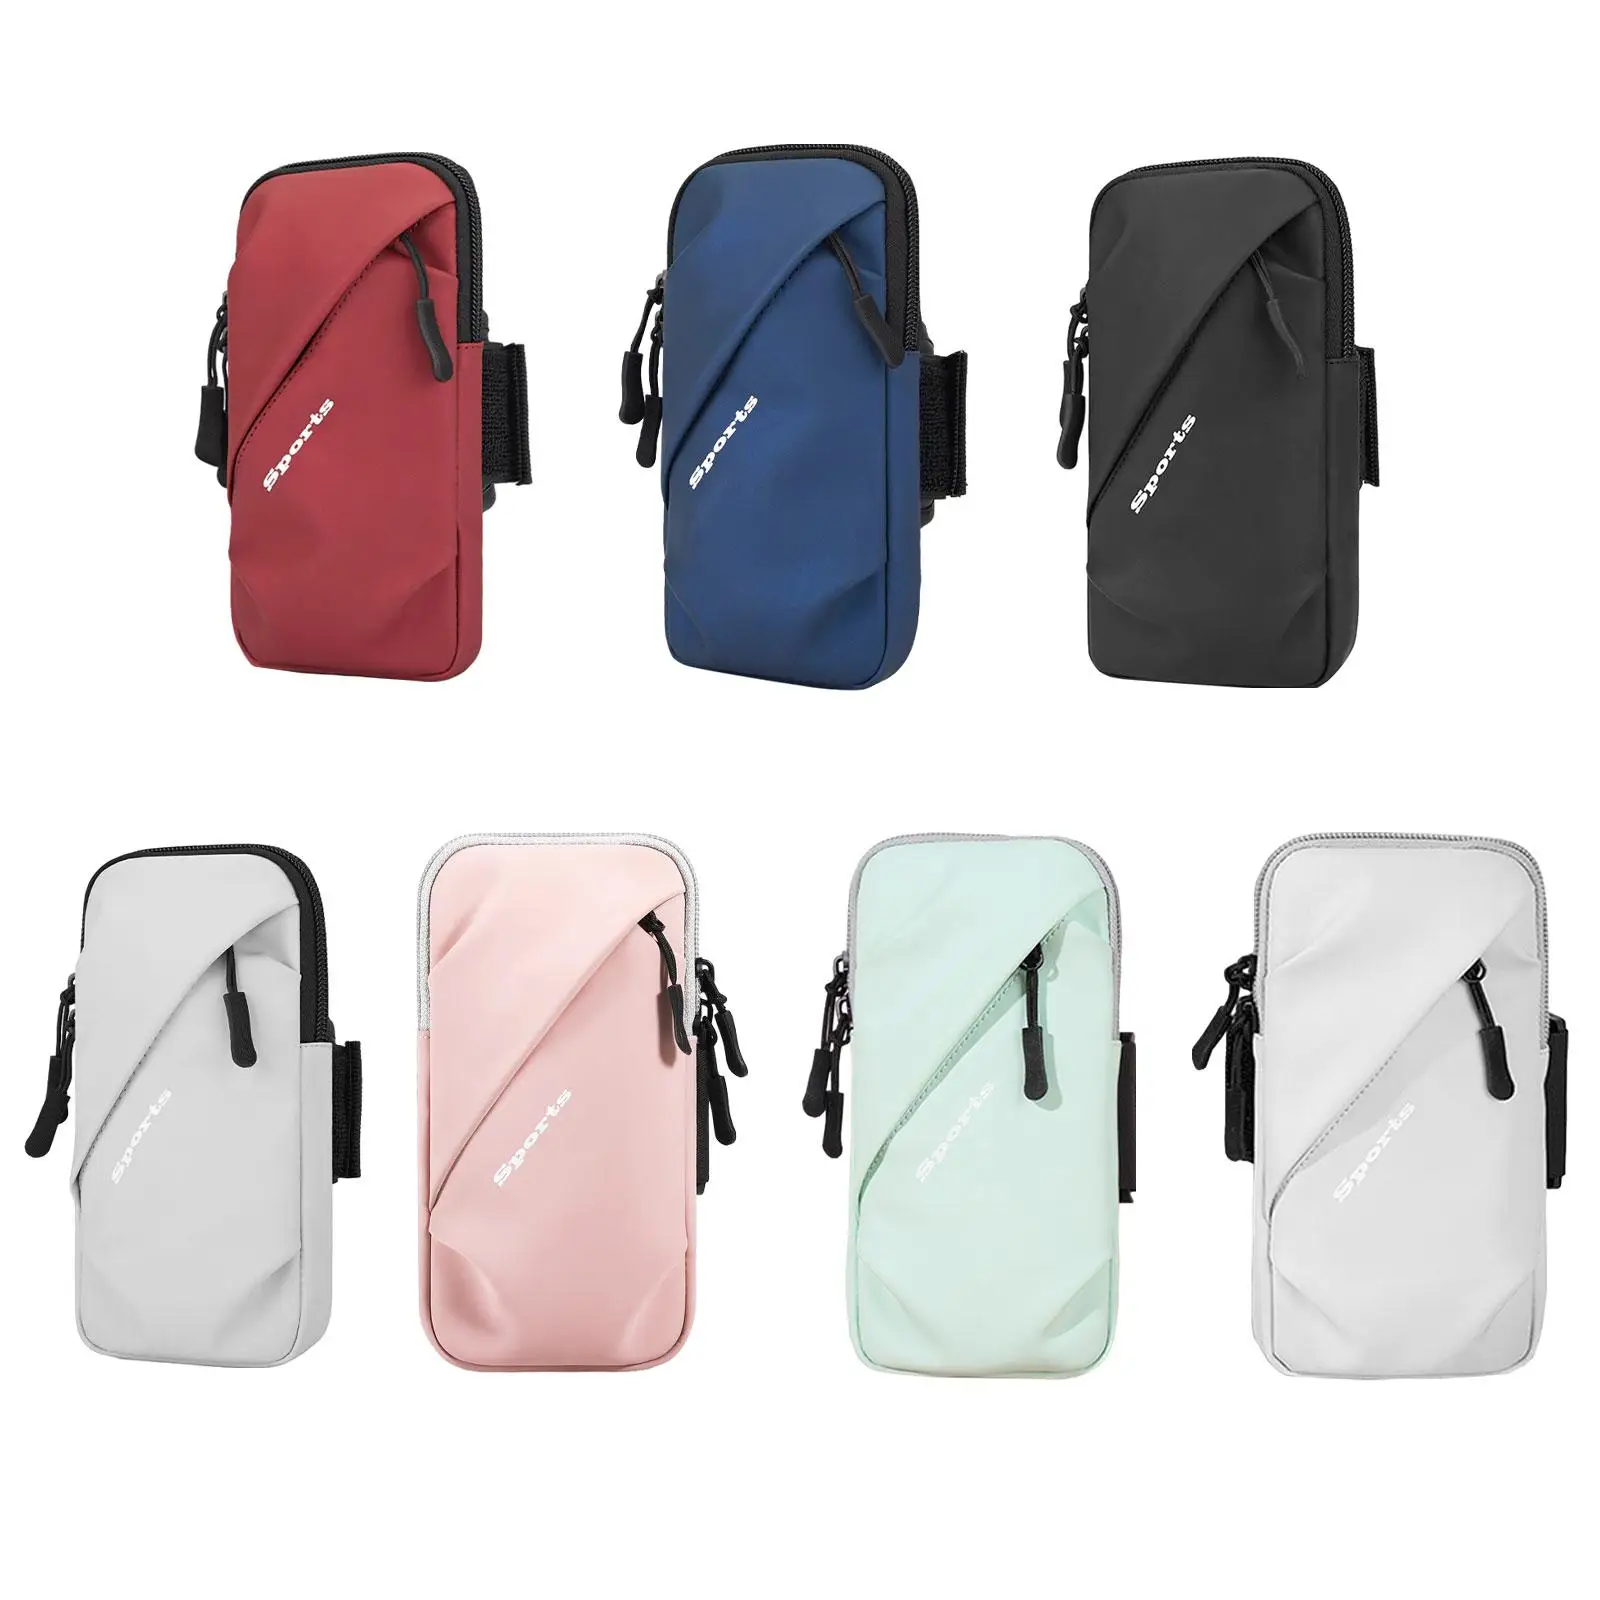 Phone Arm Band Bag Wrist Pouch Phone Holder Pouch Phone Wristband Sports Arm Bag for Travel Workout Sport Walking Exercise